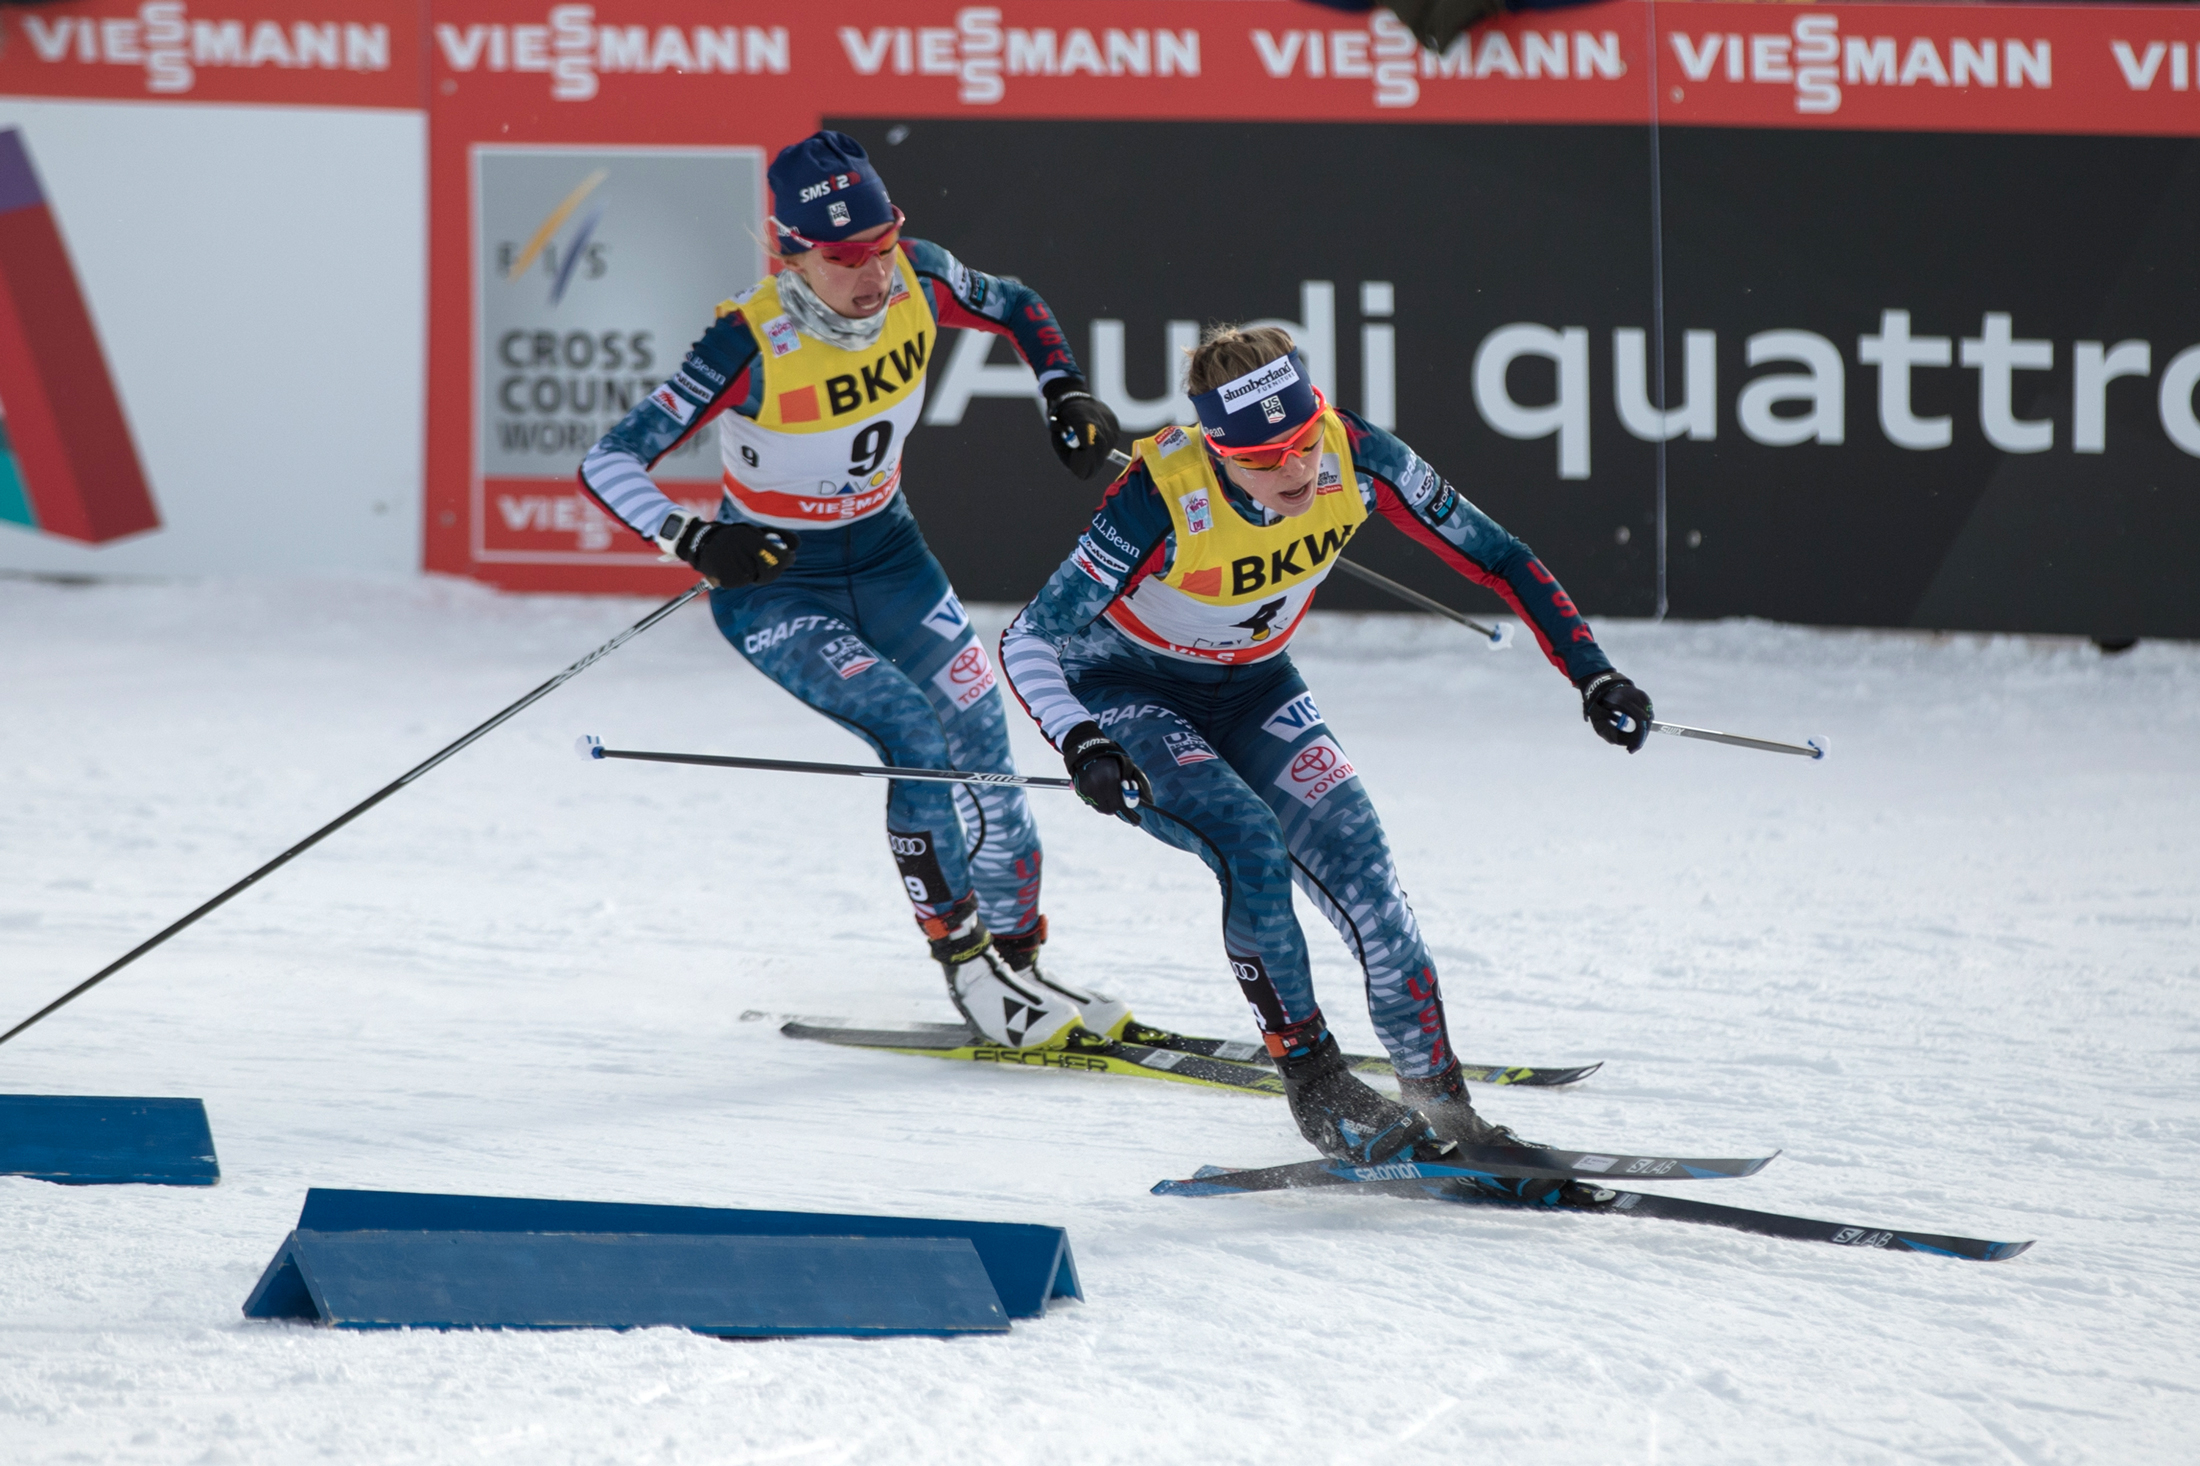 Minneapolis to Host 2020 FIS Cross Country World Cup